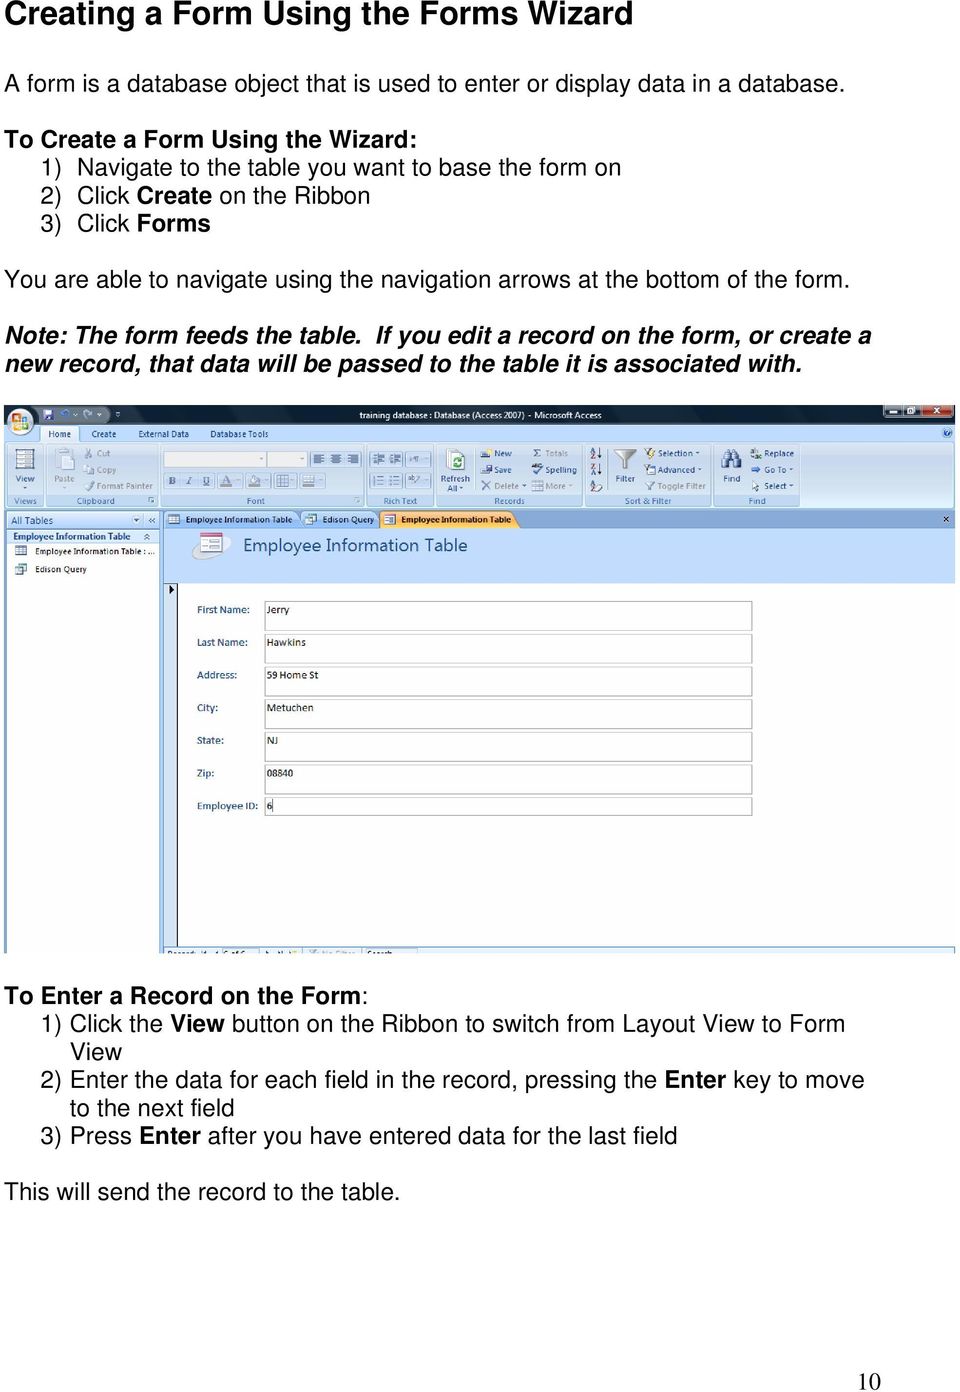 bottom of the form. Note: The form feeds the table. If you edit a record on the form, or create a new record, that data will be passed to the table it is associated with.